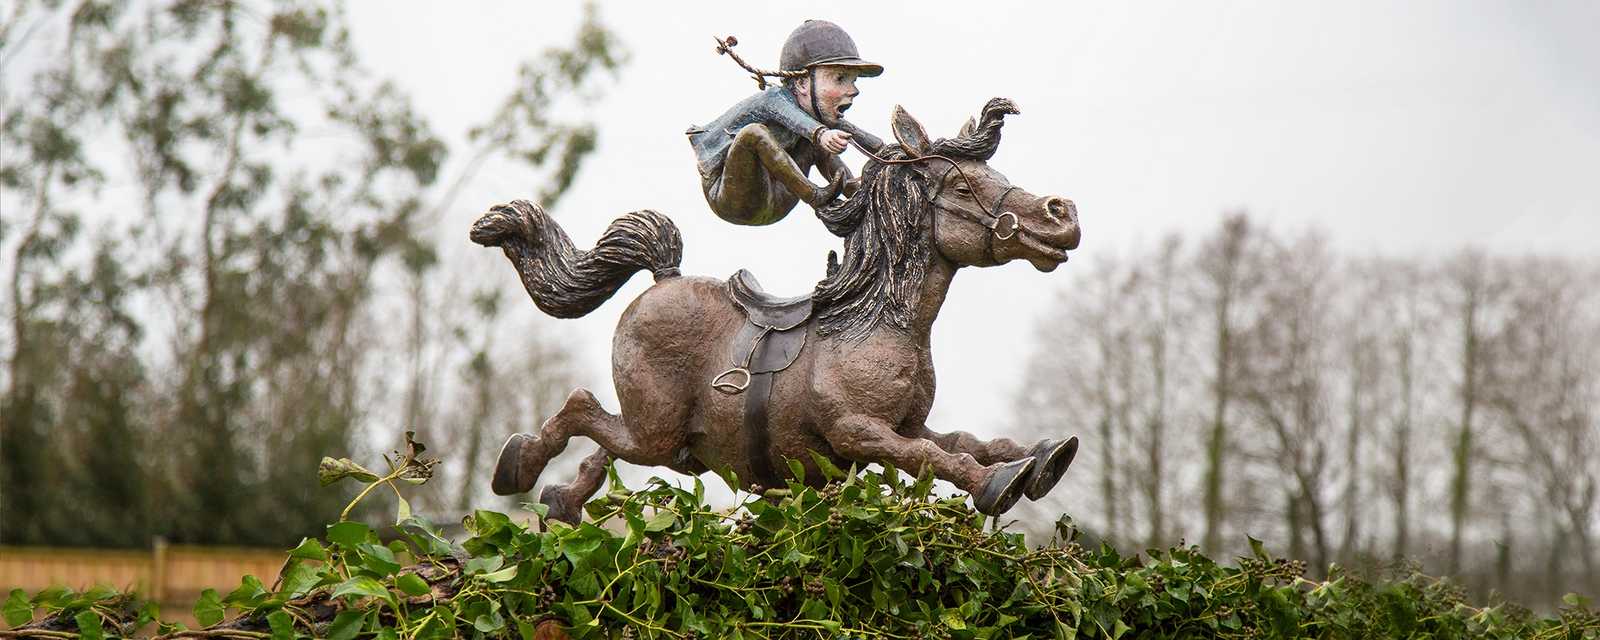 normal thelwell pony and rider